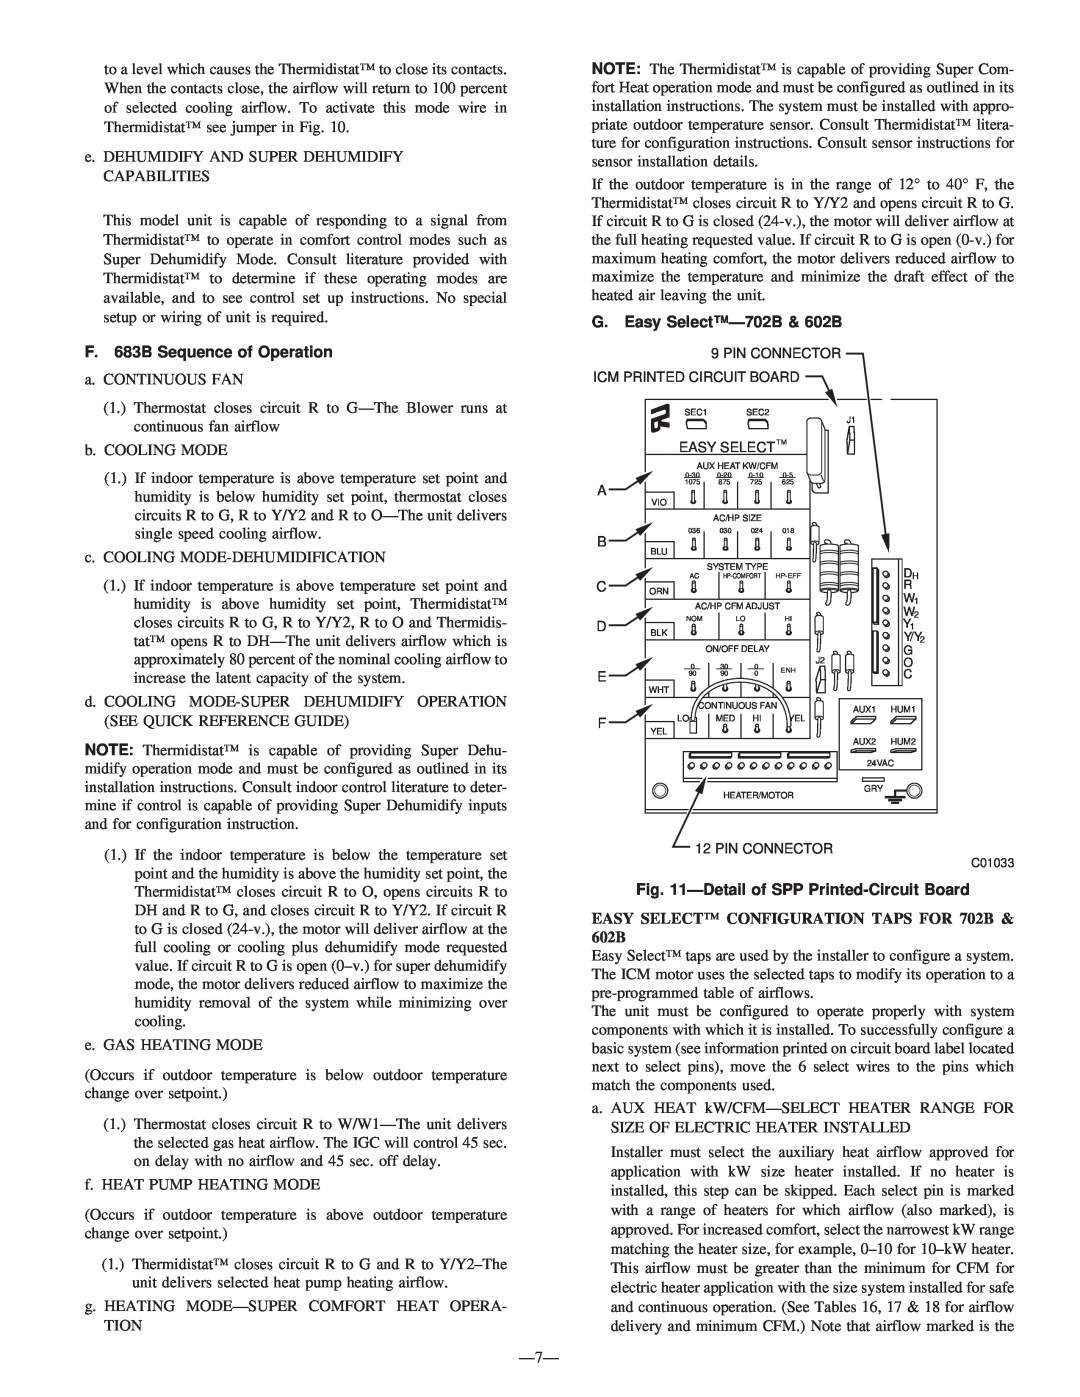 Bryant 602B, 583B, 702B installation instructions F. 683B Sequence of Operation, ÐDetail of SPP Printed-Circuit Board 